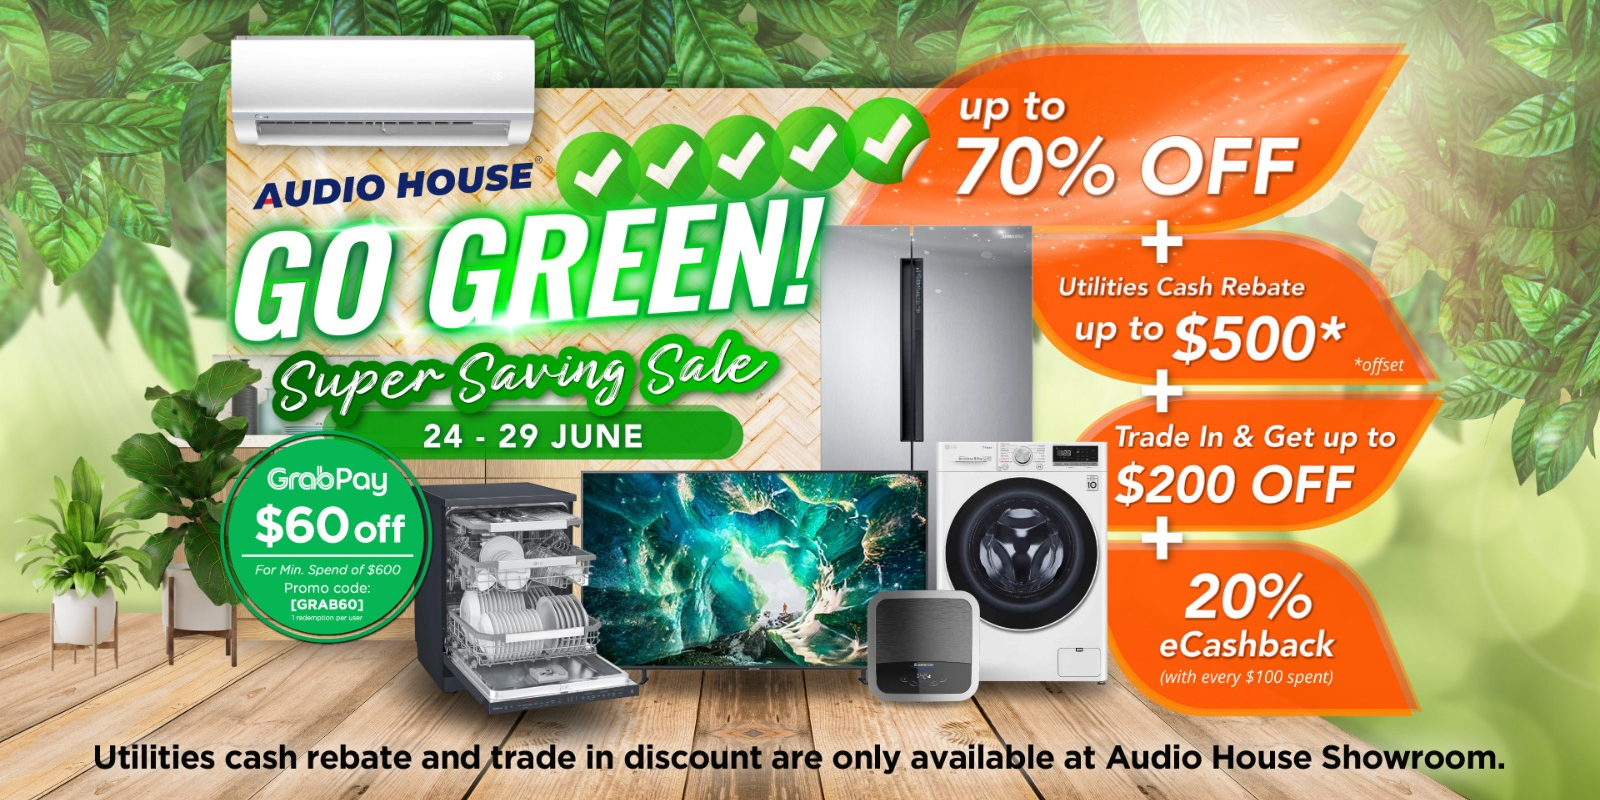 Singapore’s First-Ever Go Green Super Saving Sale is Here At Audio House!